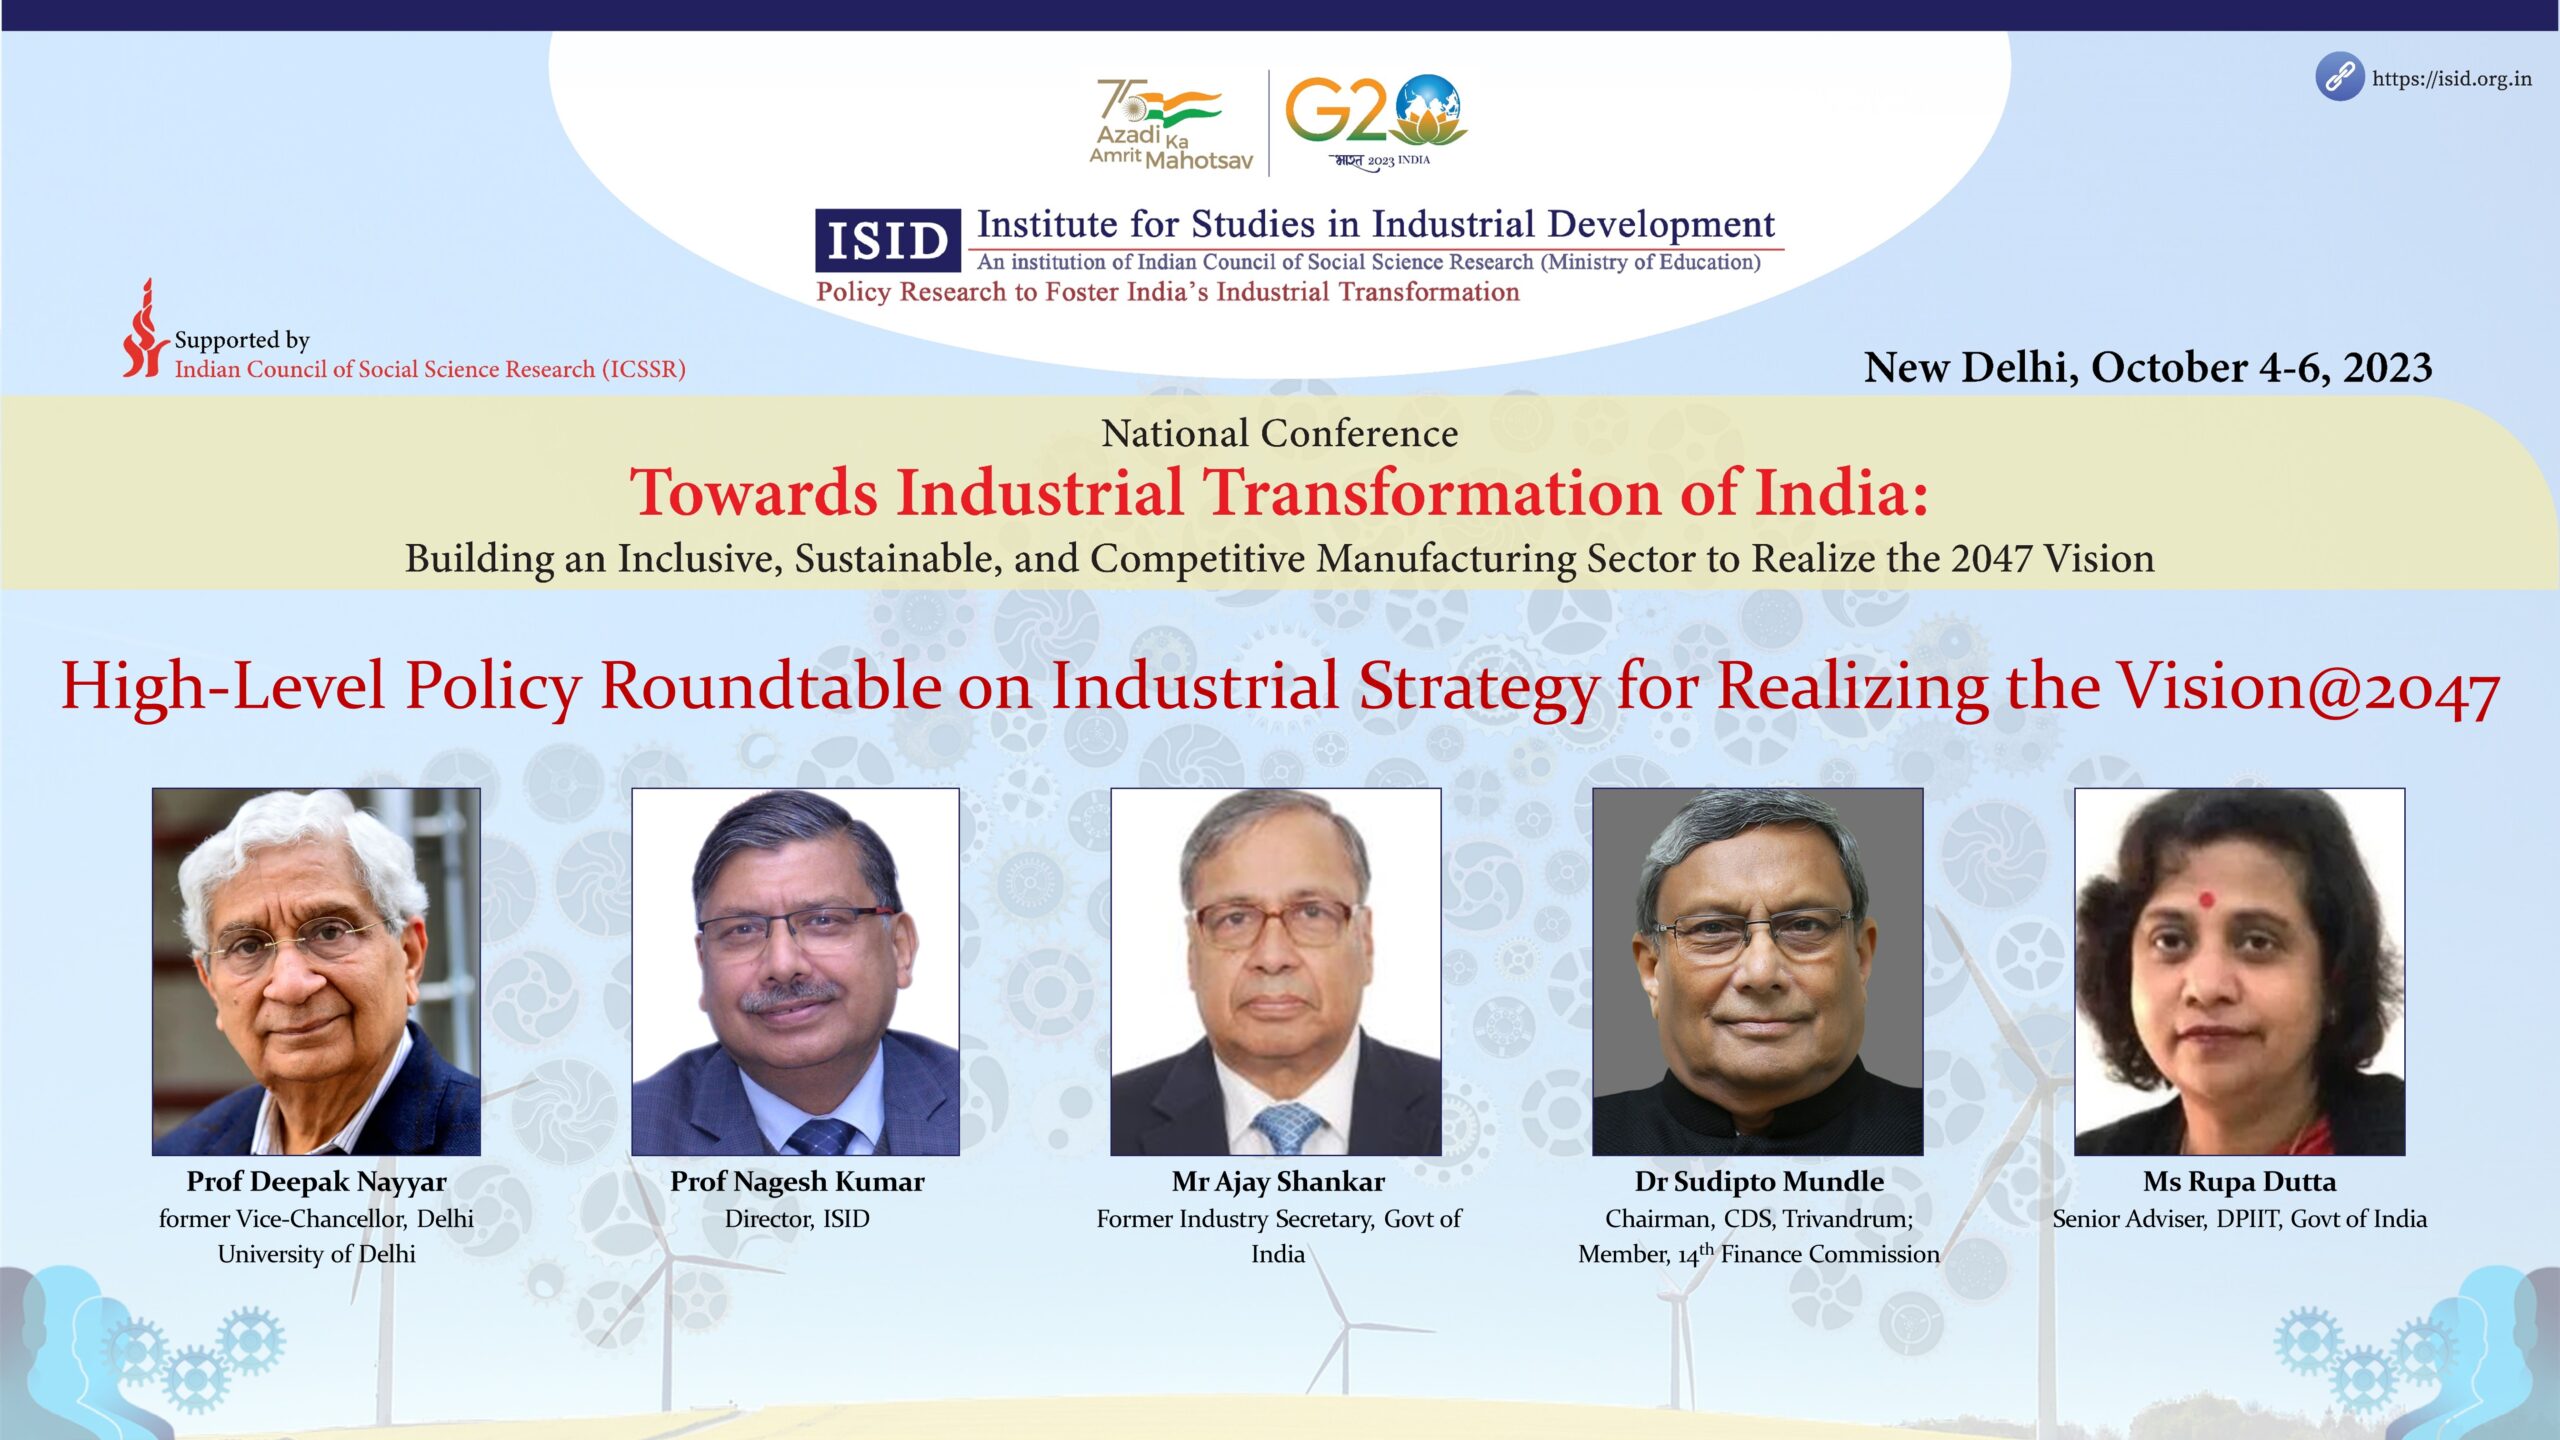 High-Level Policy Roundtable on Industrial Strategy for Realizing the Vision@2047